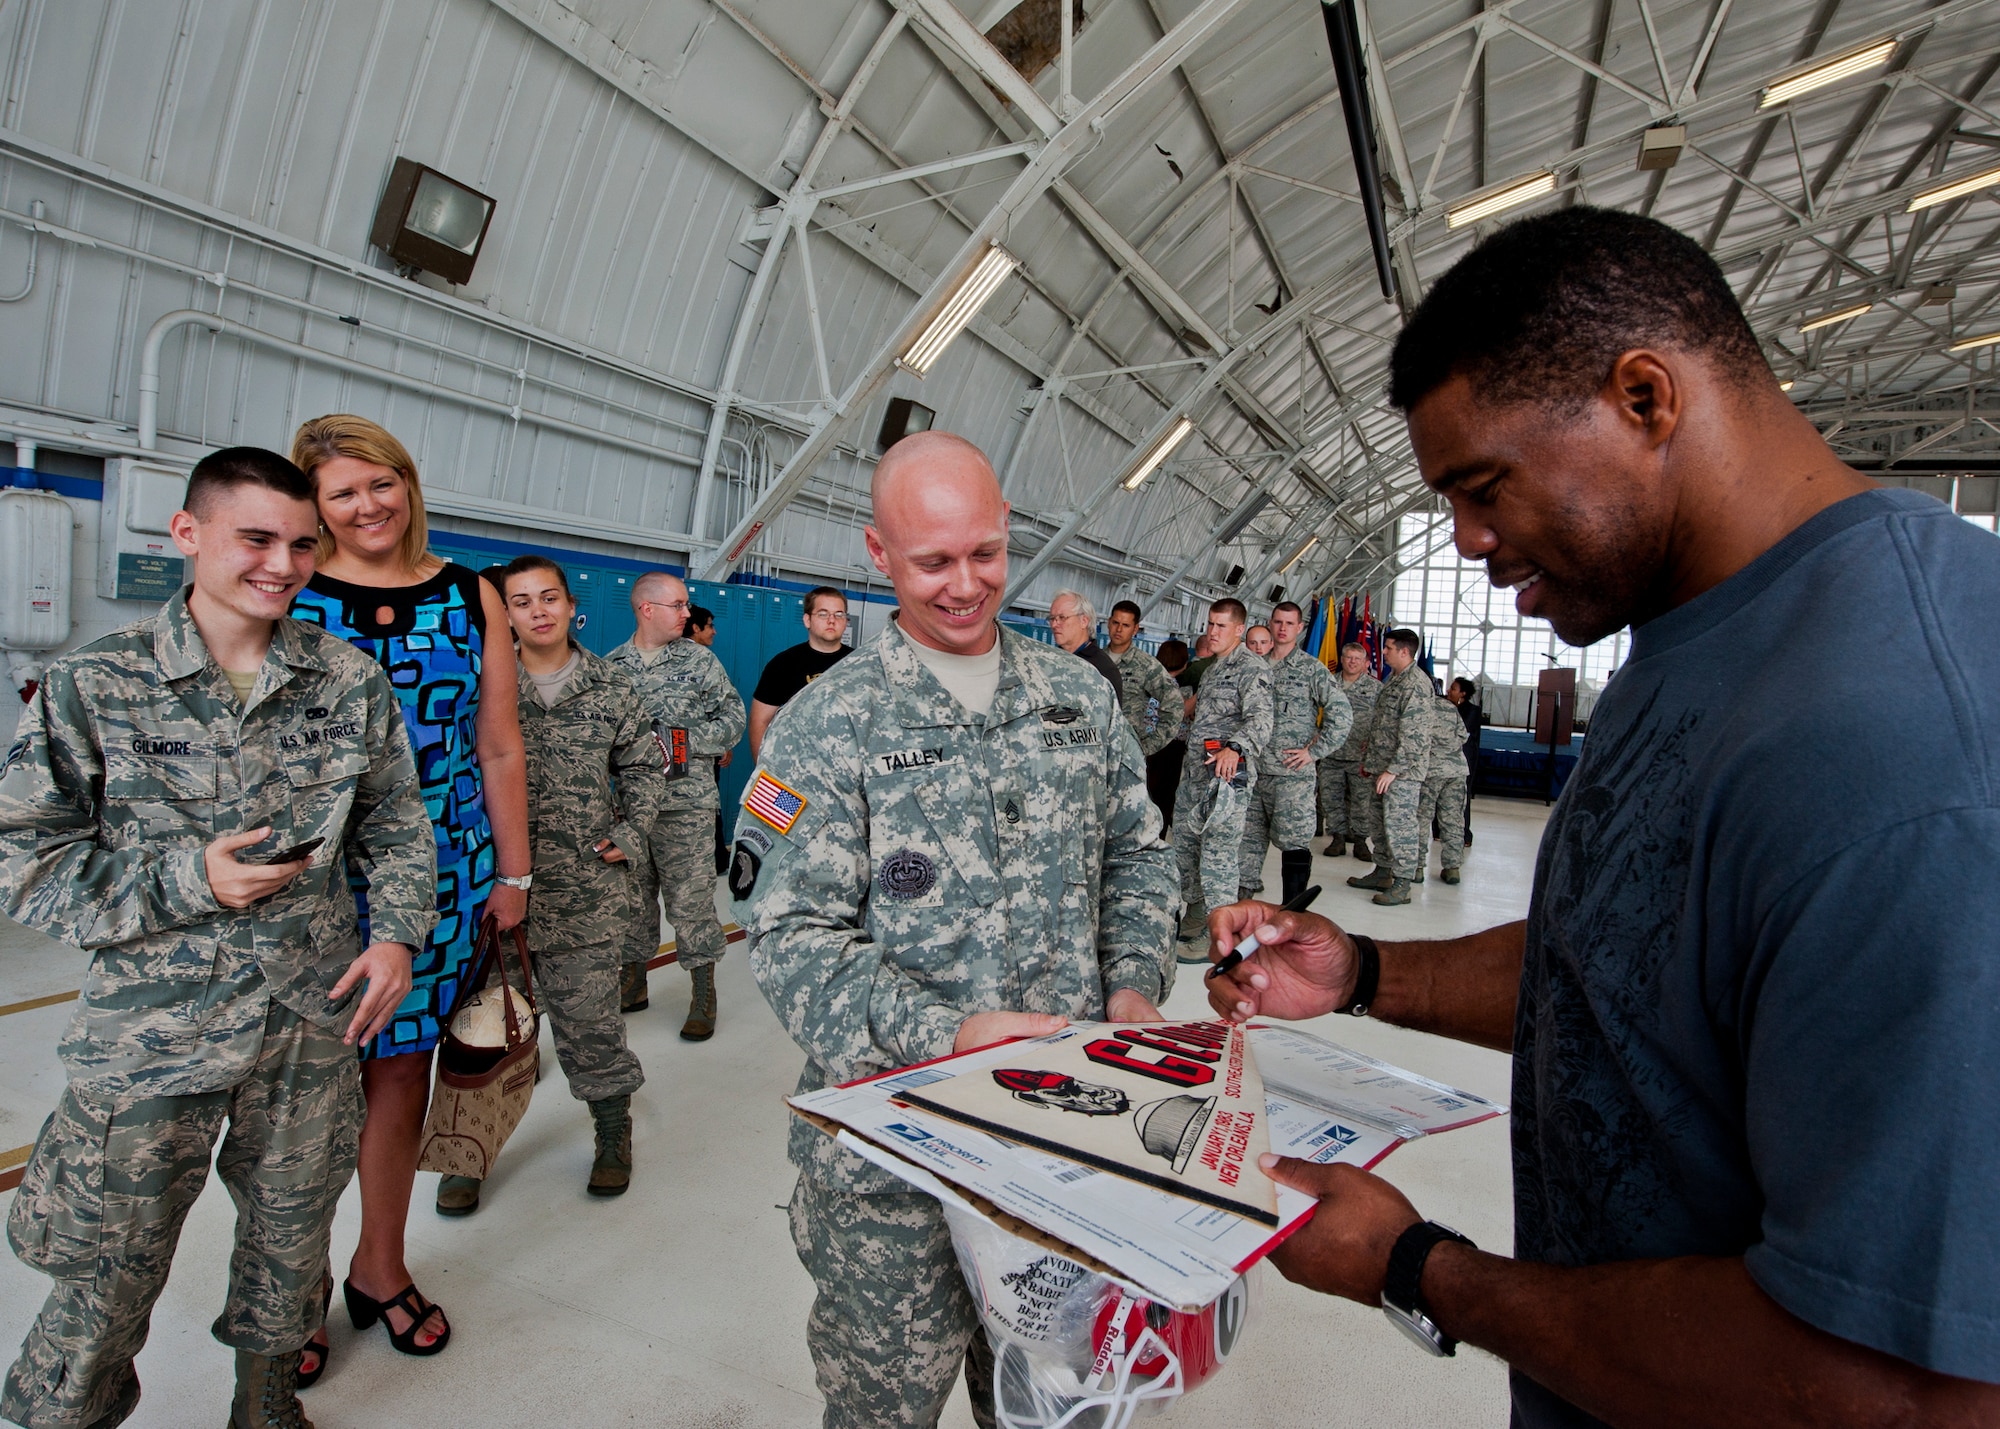 Sgt. 1st Class Matthew Talley, of the 719th Contingency Contracting Team, gets Herschel Walker to sign his 1983 Georgia Bulldogs pennant March 22 at Eglin Air Force Base, Fla.  Walker visited the base to speak about resiliency and the importance of asking for help. He spoke twice to large crowds of Team Eglin members about his life, career and the emotional and mental struggles he encountered throughout.  (U.S. Air Force photo/Samuel King Jr.)